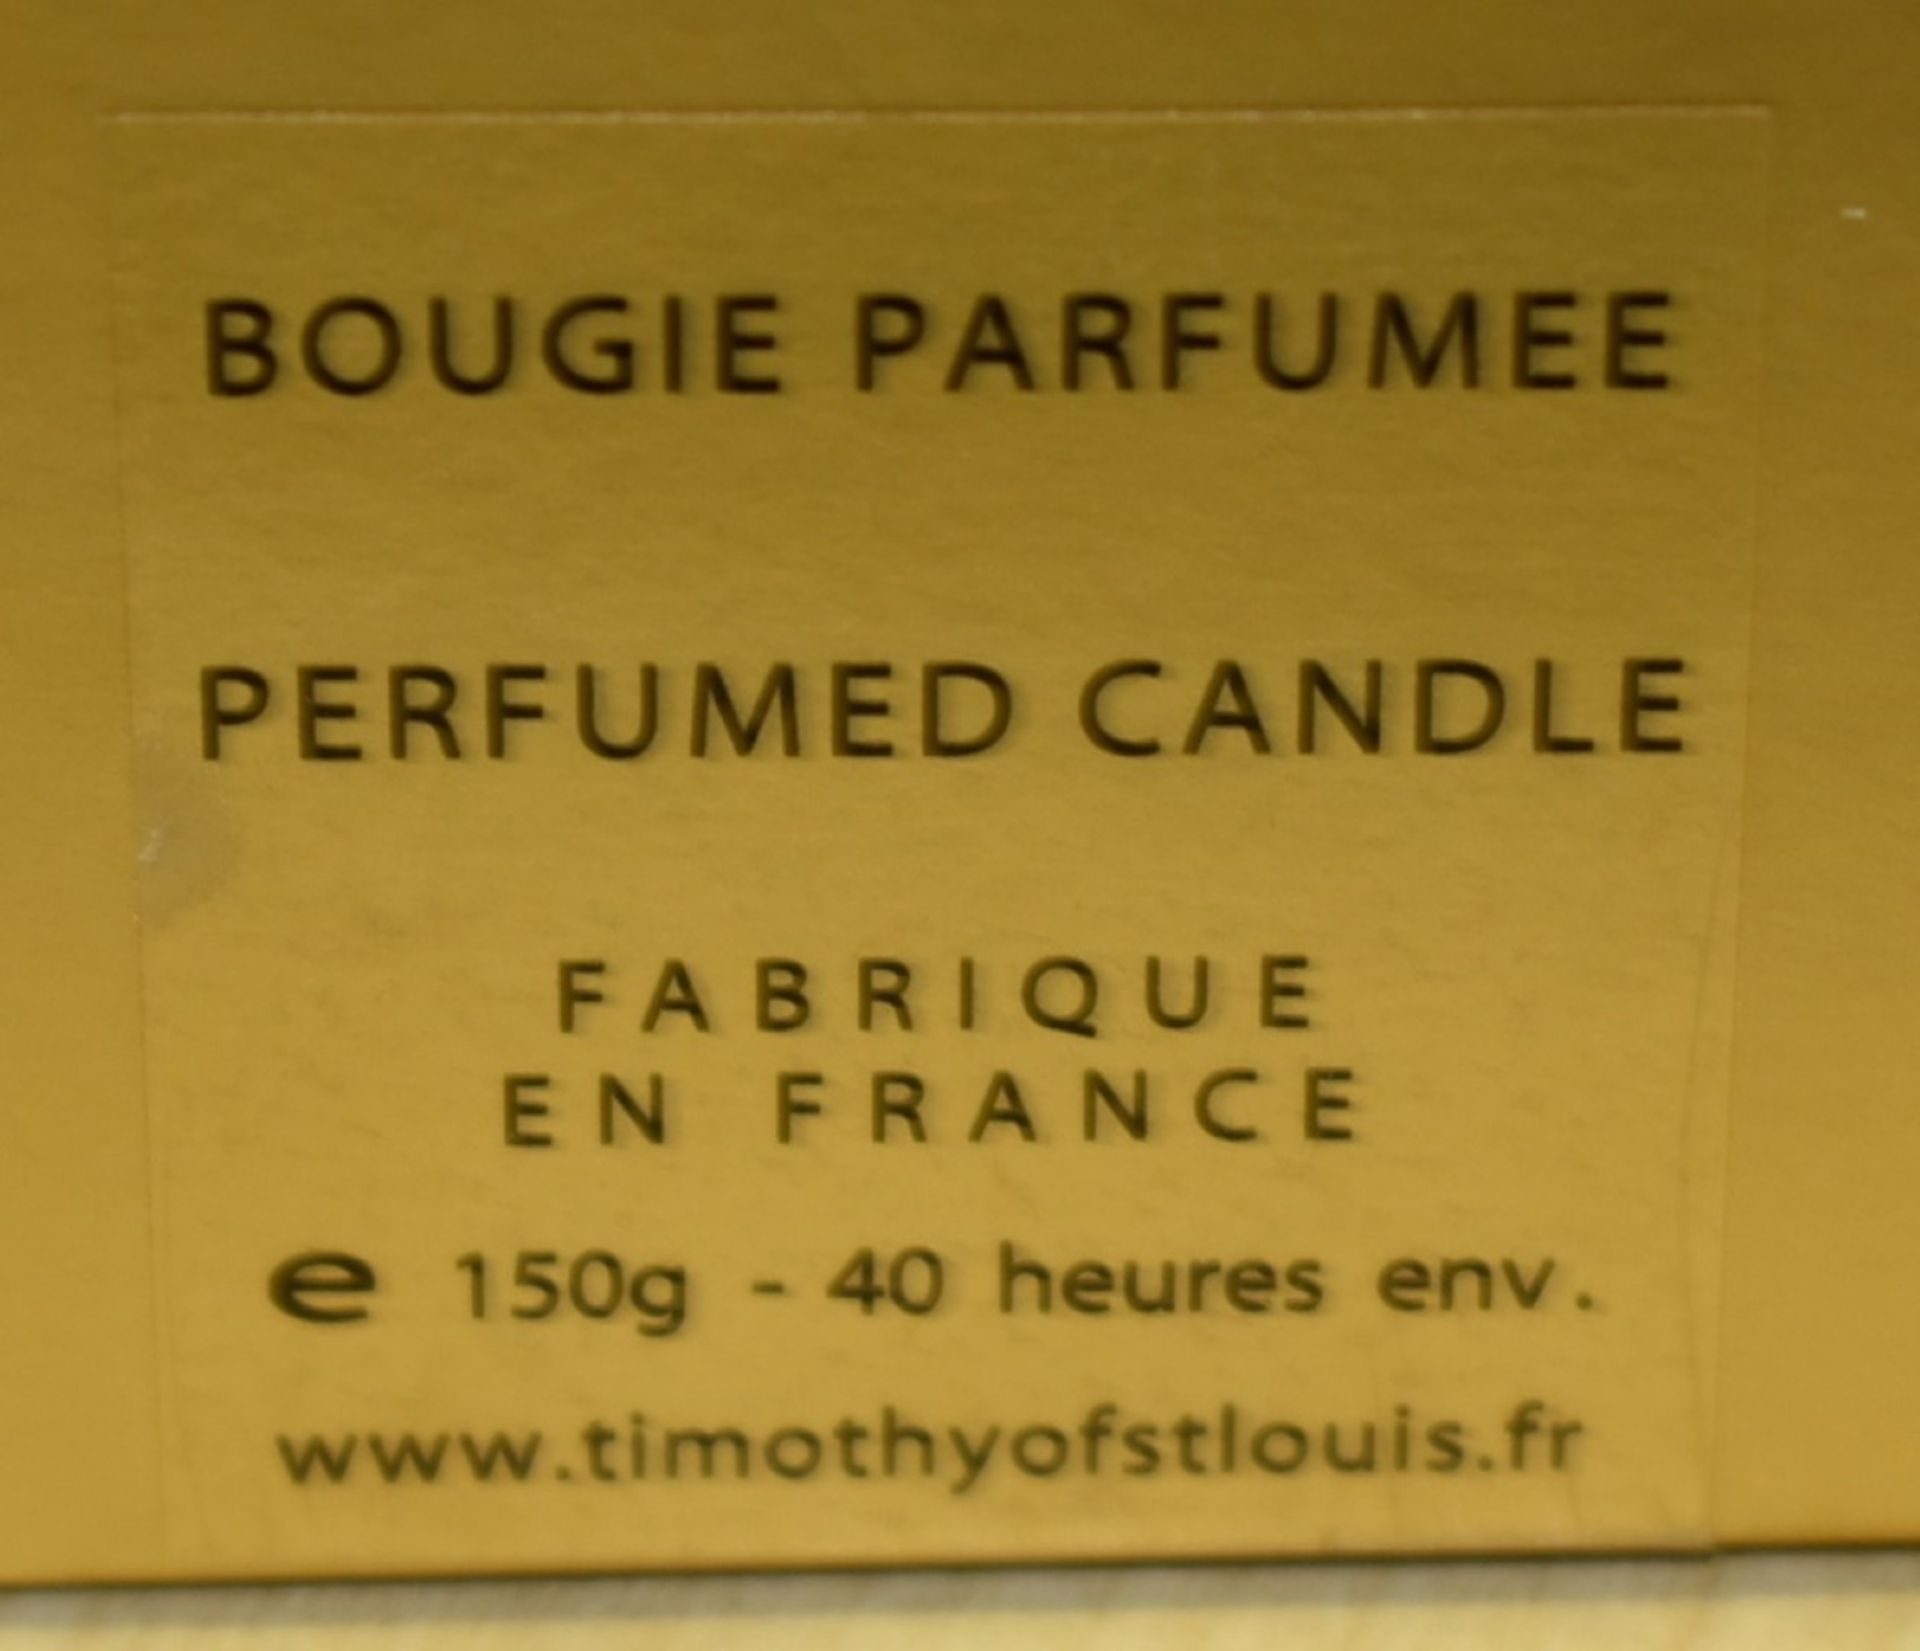 2 x Timothy of St Louis Perfumed Candle - Santal & Frangipanier - Brand New and Boxed - 150g Scented - Image 3 of 5